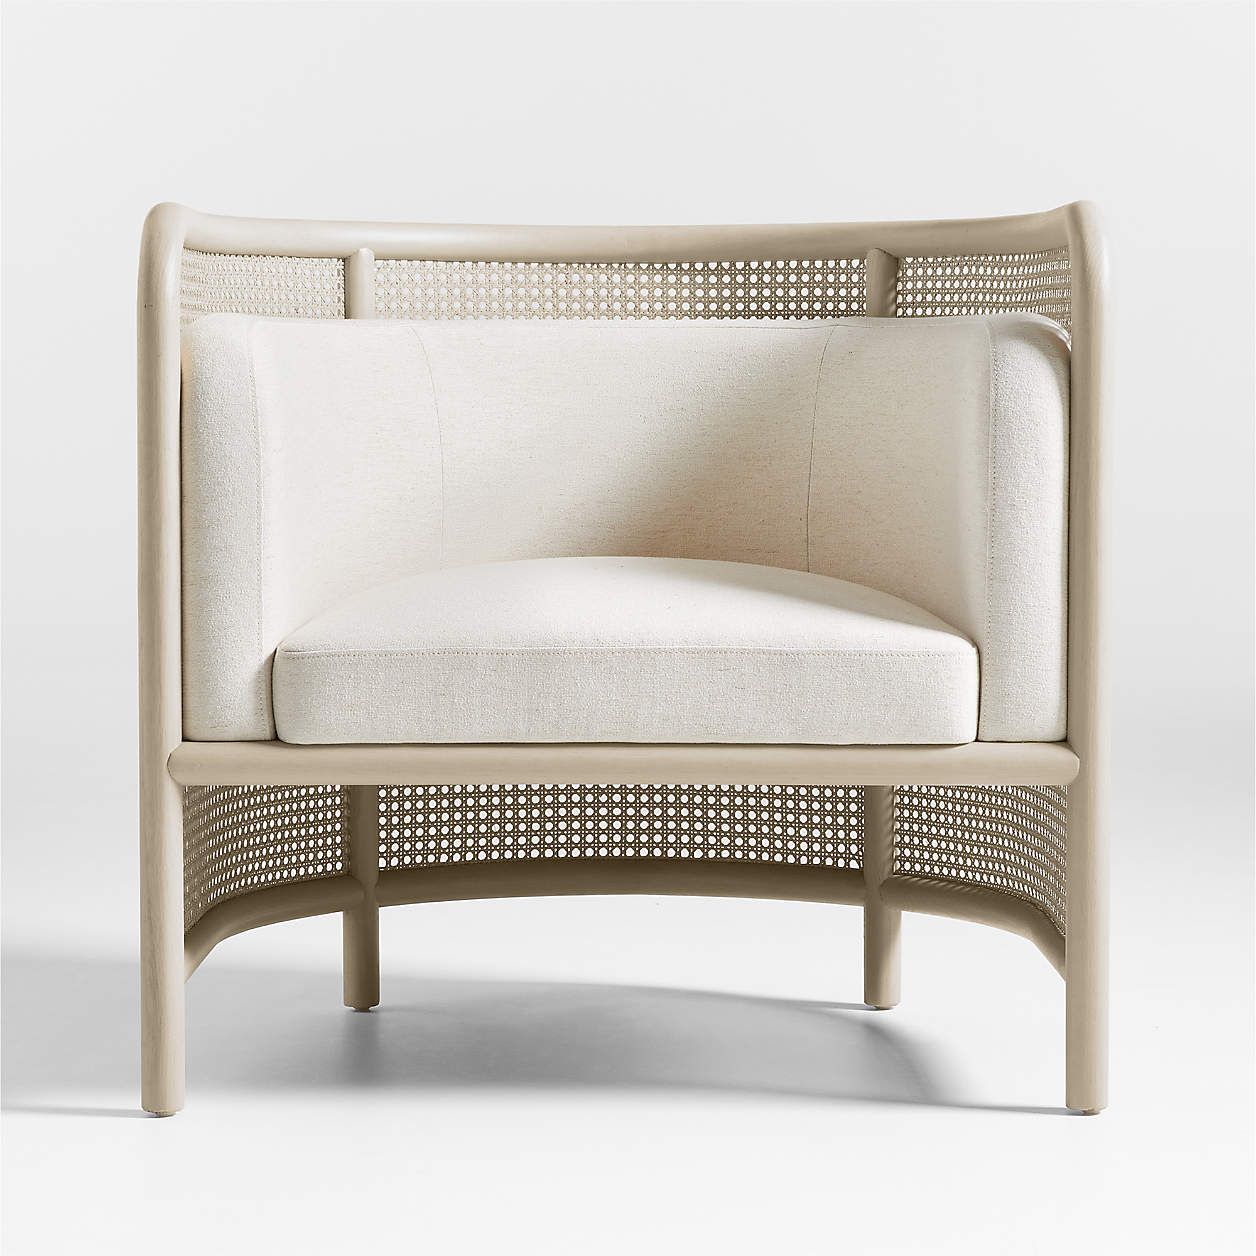 Fields Cane Back White Accent Chair by Leanne Ford + Reviews | Crate and Barrel | Crate & Barrel